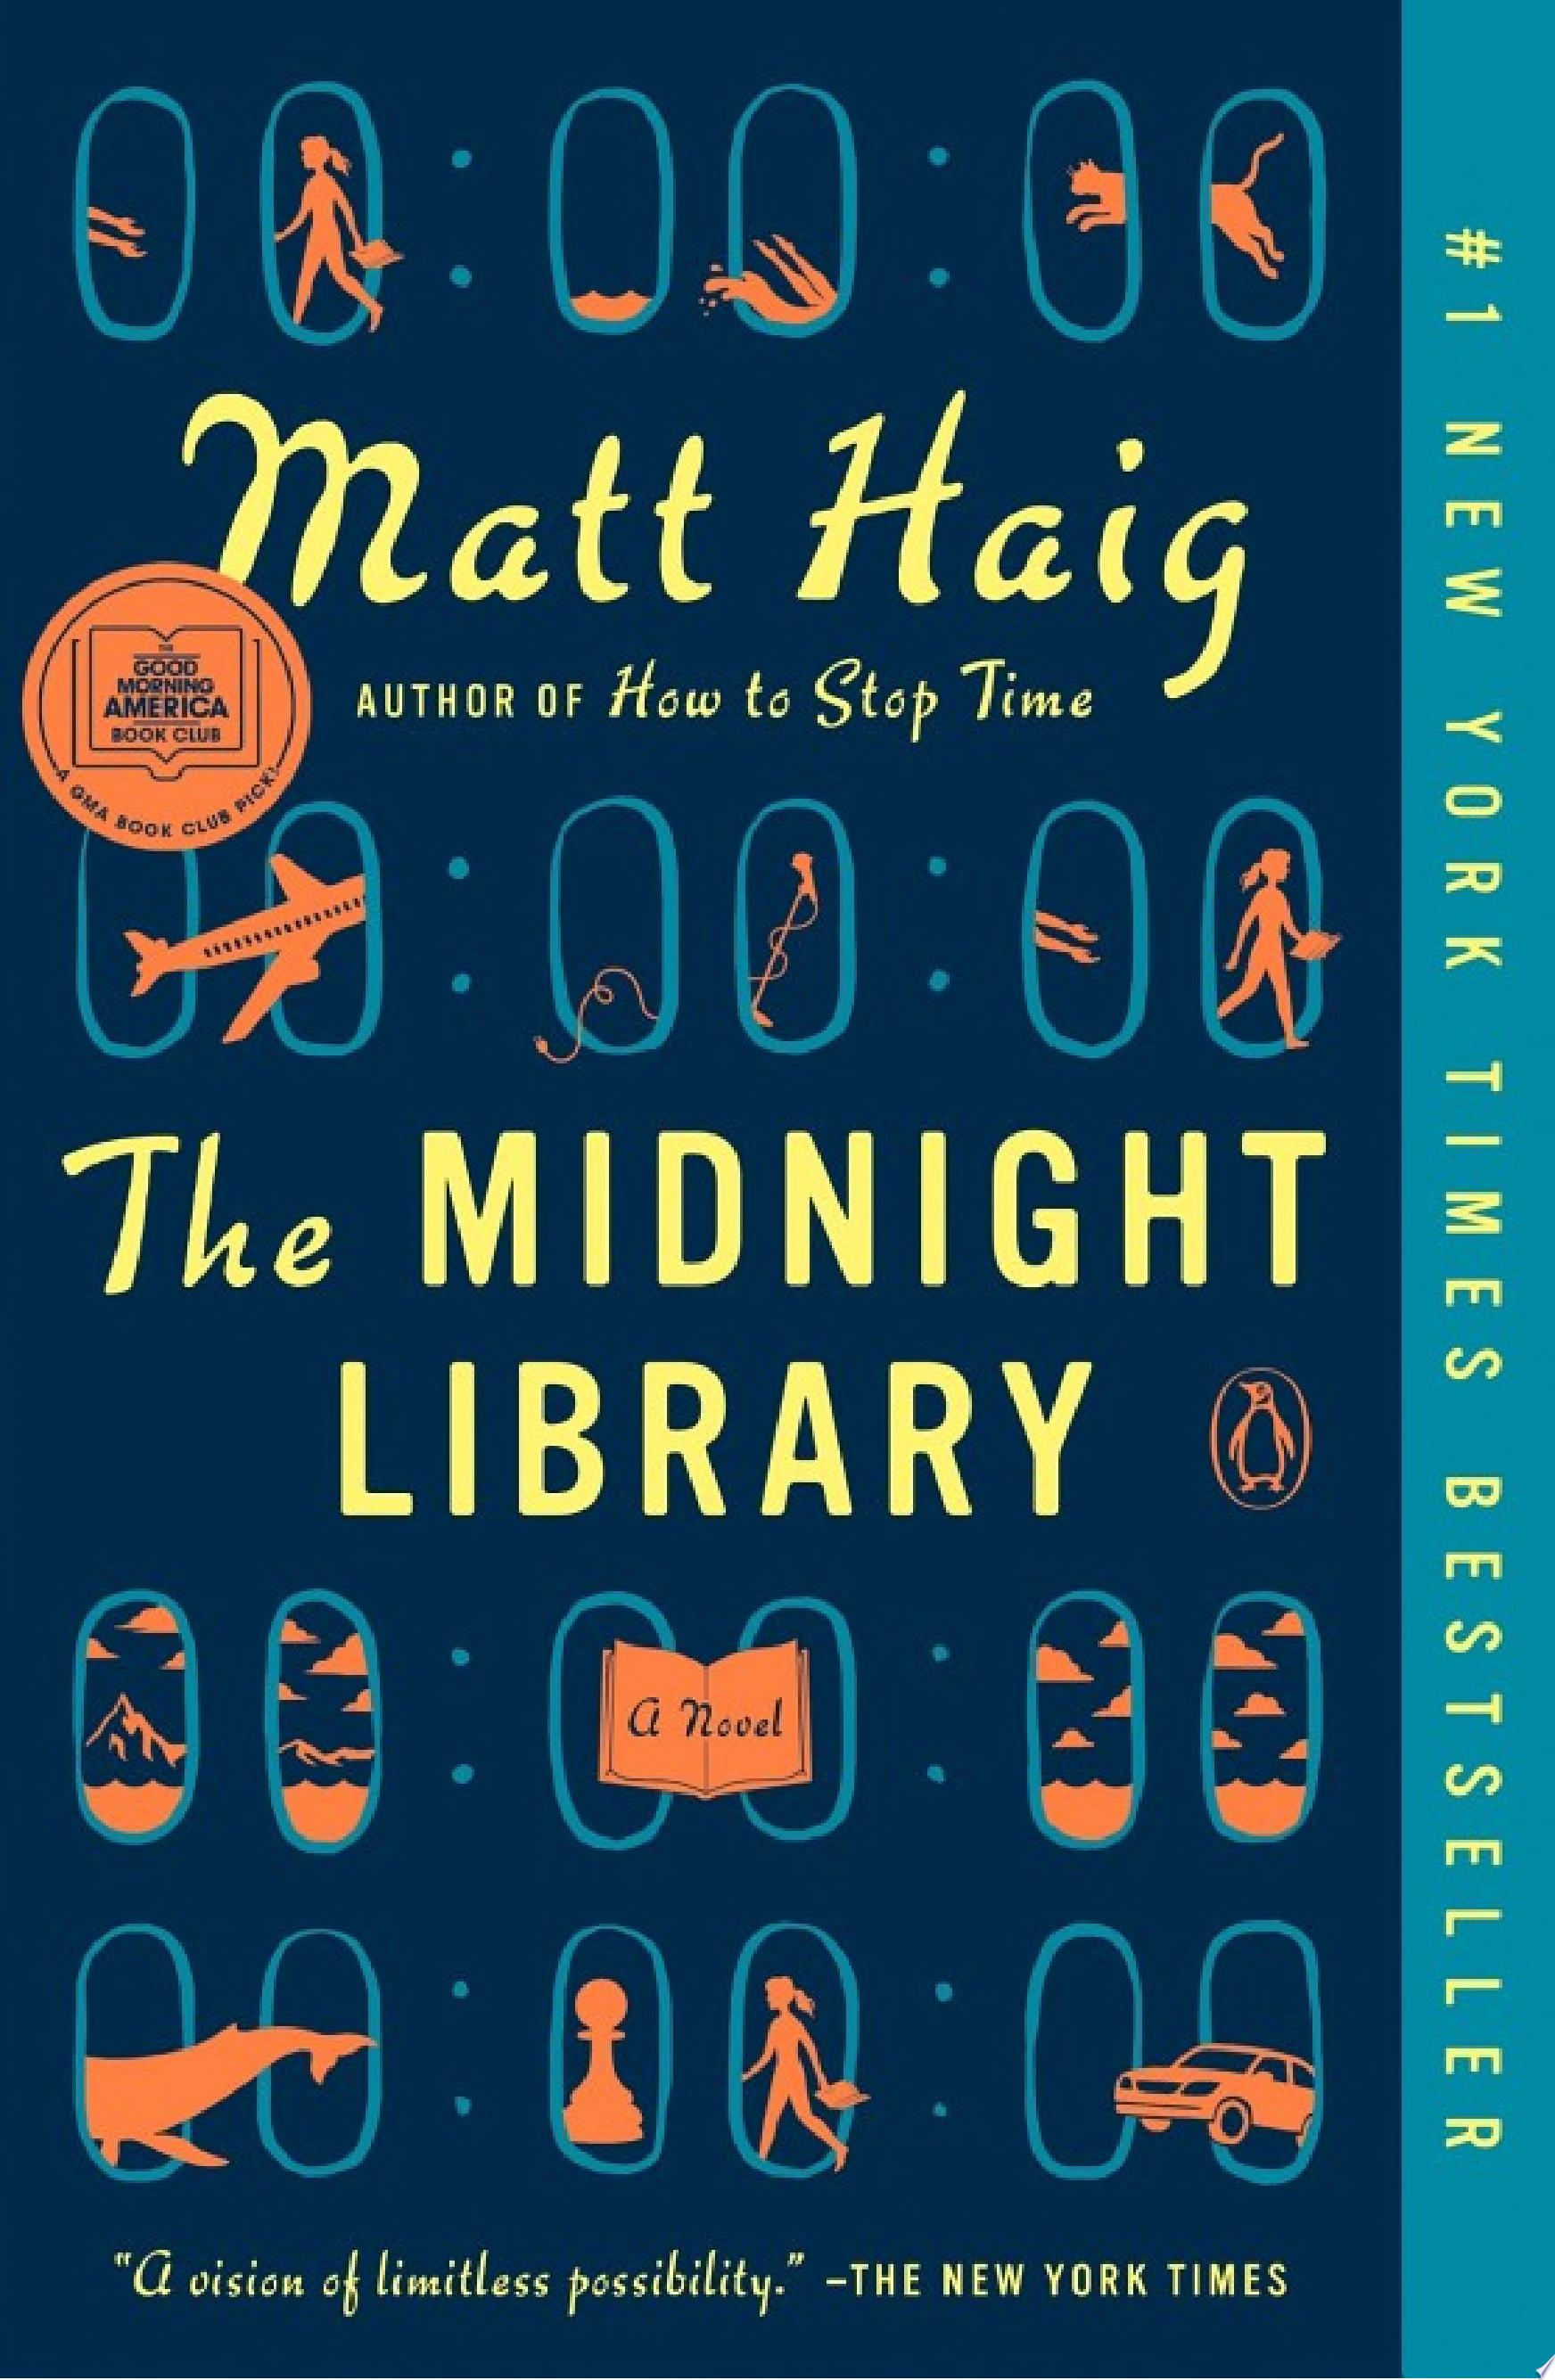 Image for "The Midnight Library"